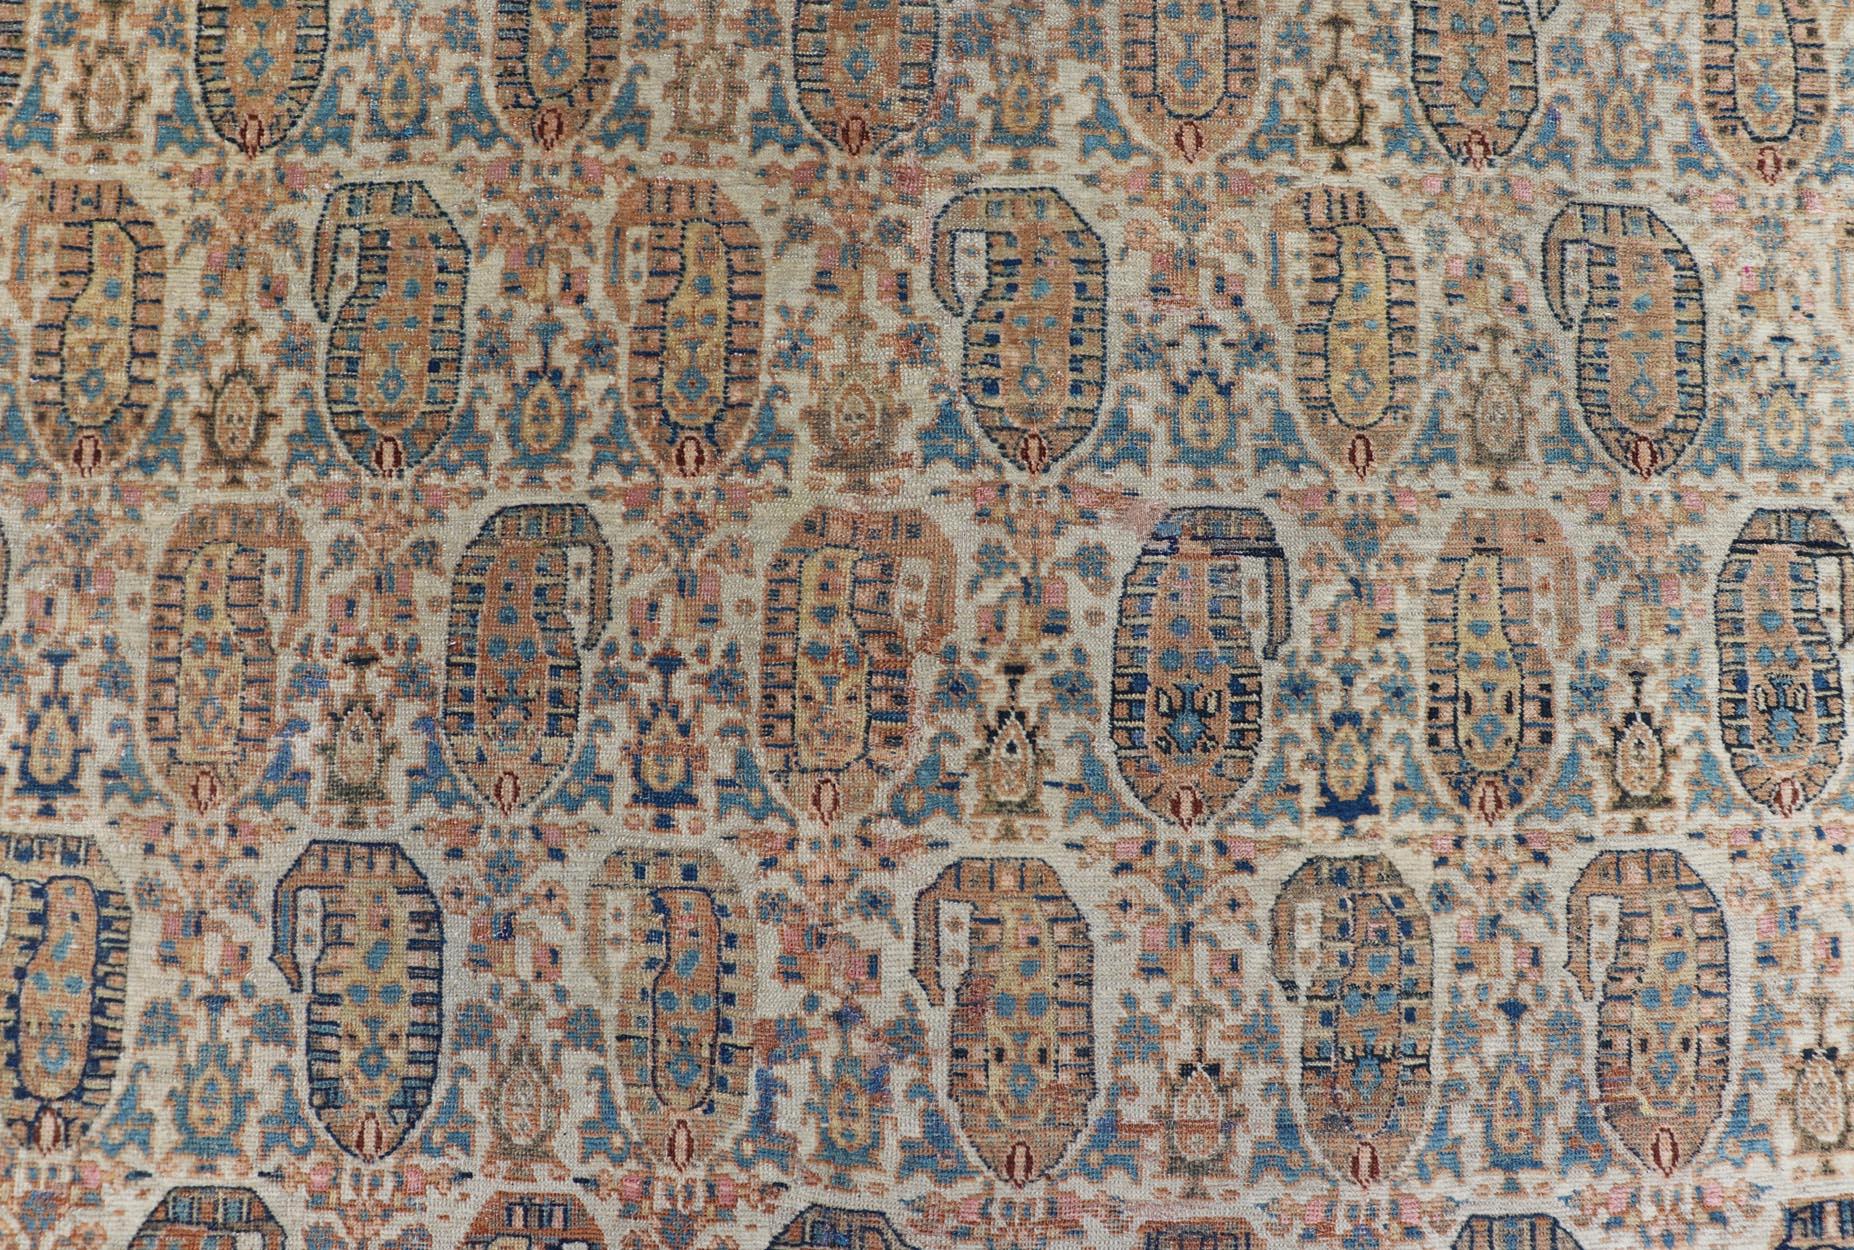 Antique Faraghan Persian Rug in Cream Color Background With Paisley's With Blue. Keivan Woven Arts / Rug / X23-0401-154, Faraghan  Antique Faraghan, Antique Sarouk.
Measures: 8'6 x 13'3 
This exquisite antique Faraghan fine Persian rug displays a